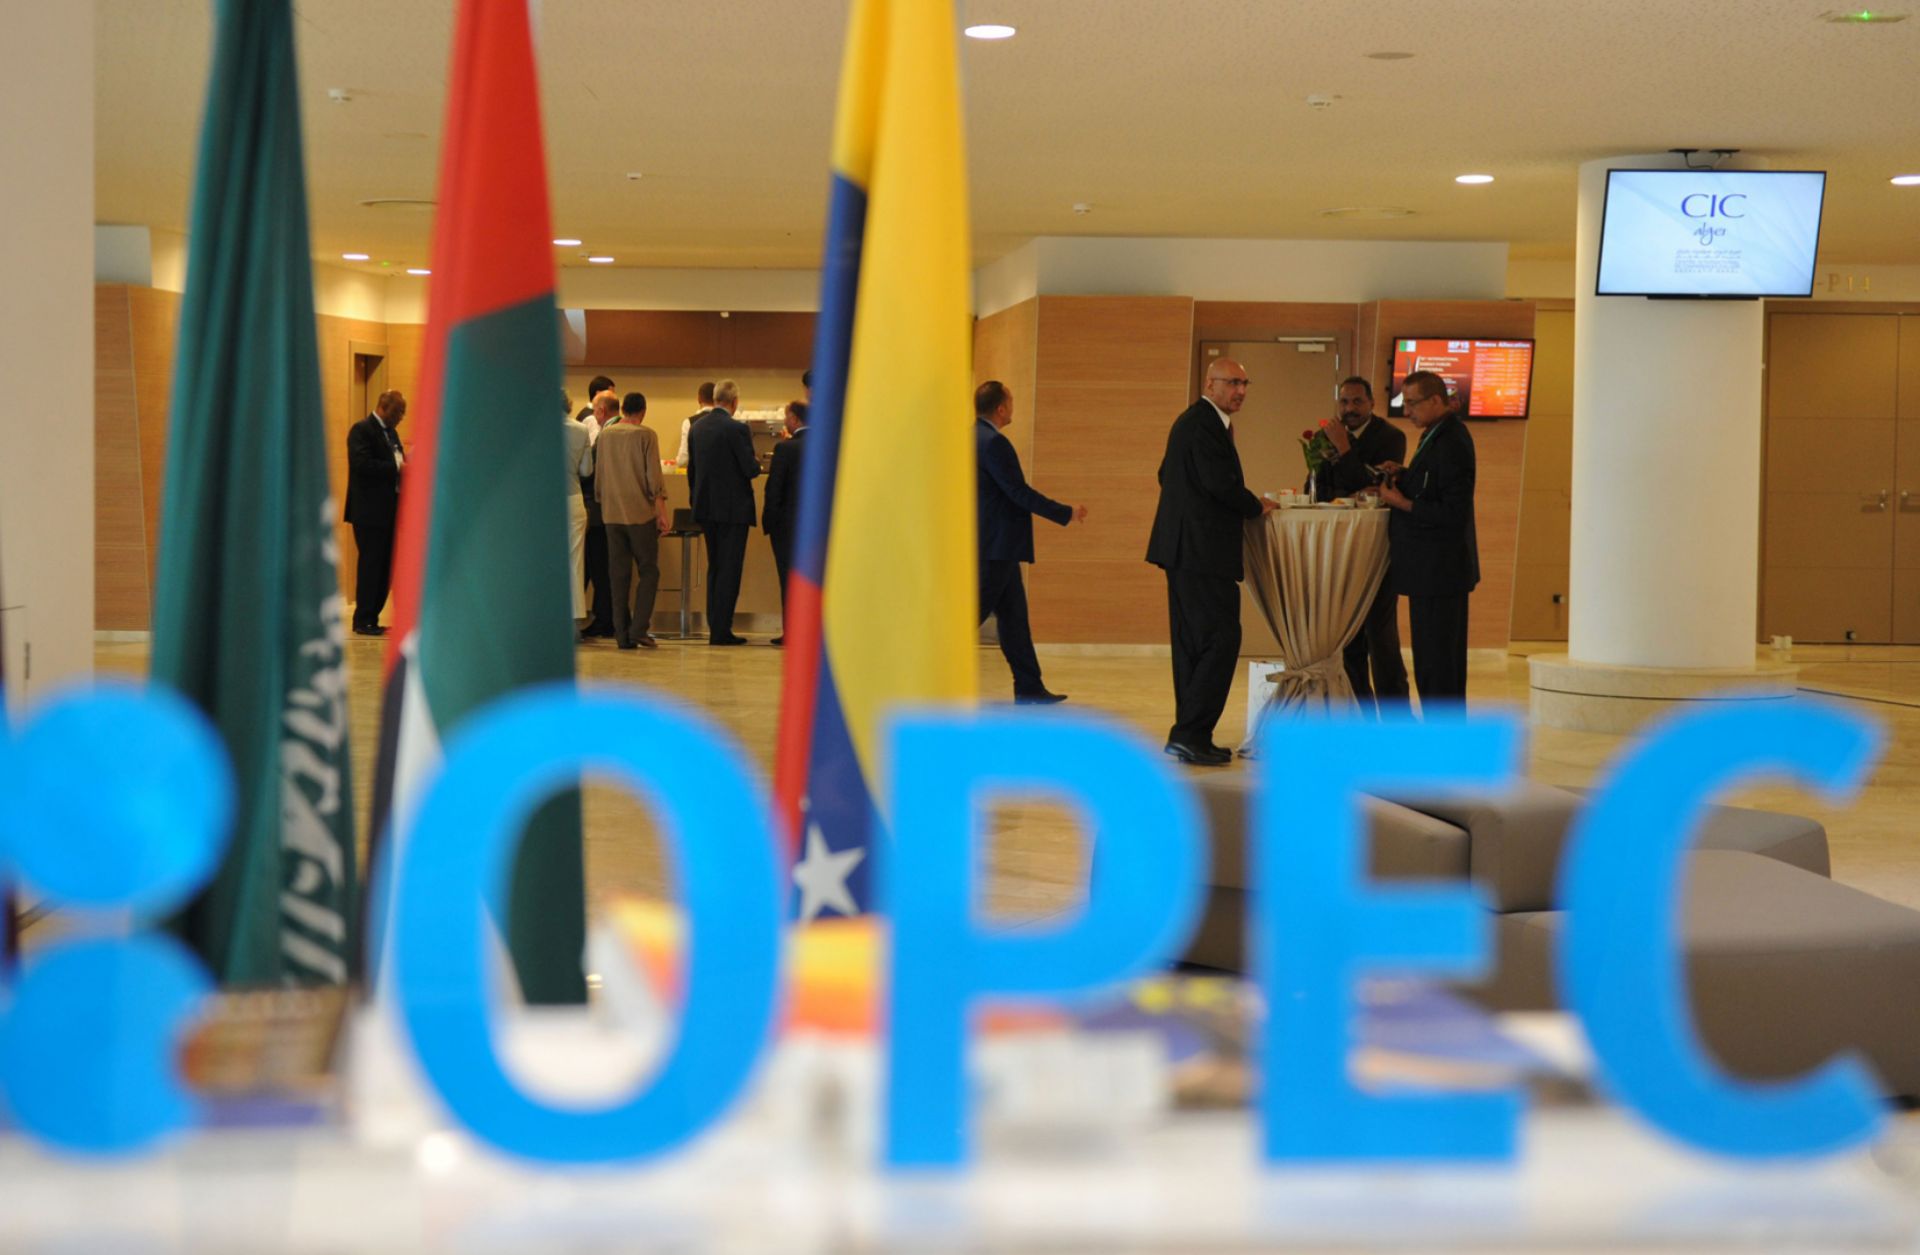 OPEC members at the International Energy Forum in Algiers agreed in principle to a reduction in oil production, but many facets of the deal remain unresolved.